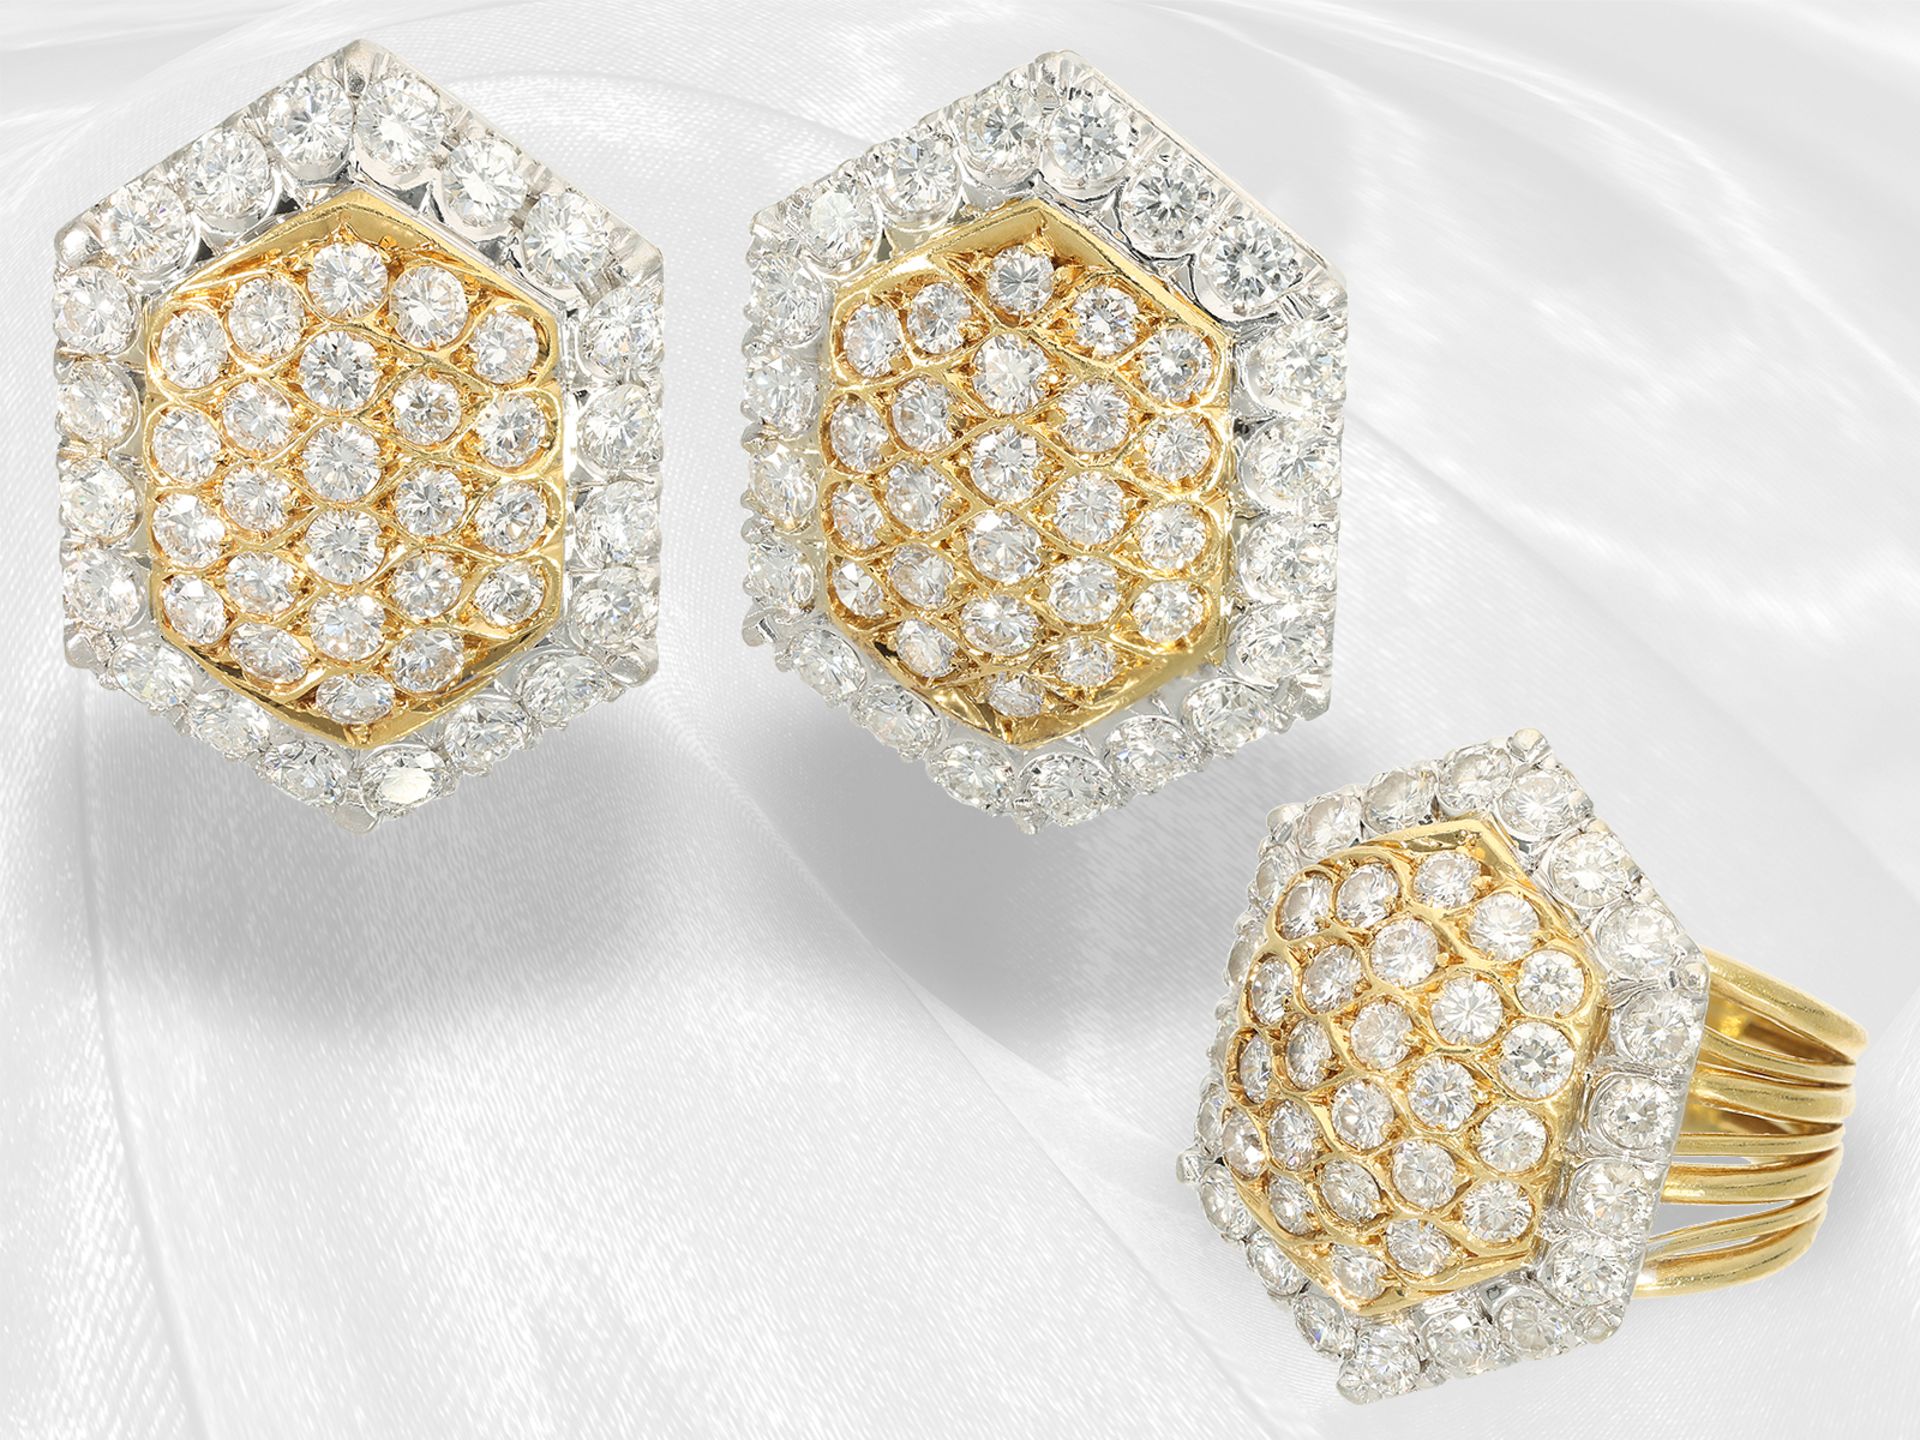 Earclips/ring: extremely luxurious vintage goldsmith's jewellery, finest brilliant-cut diamonds of a